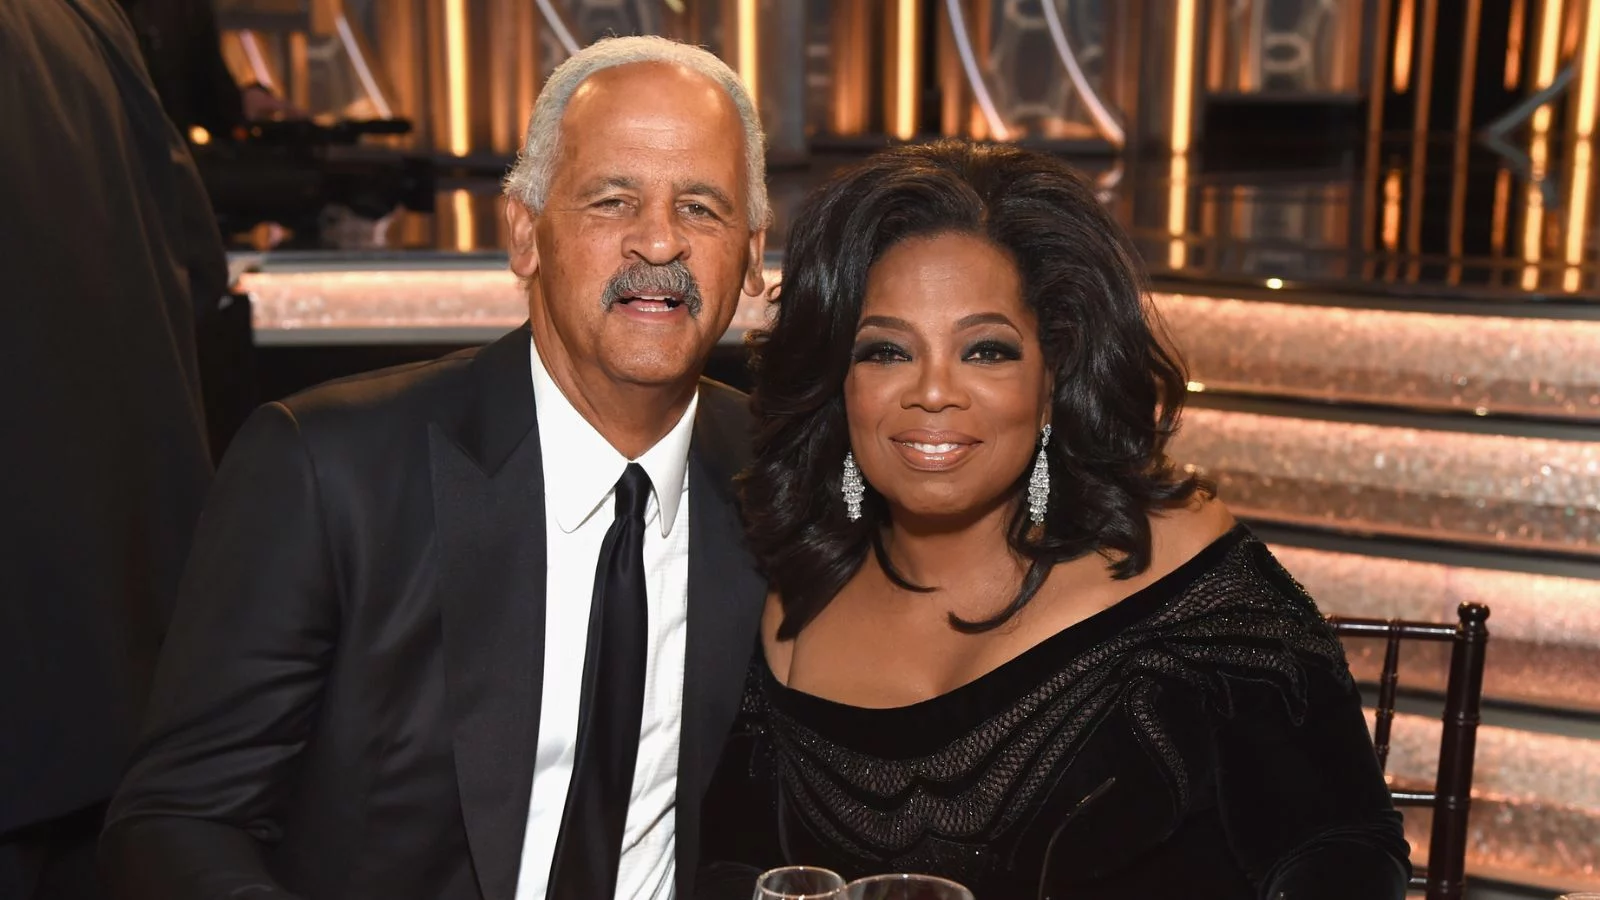 Oprah and Stedman posing together at an event. 